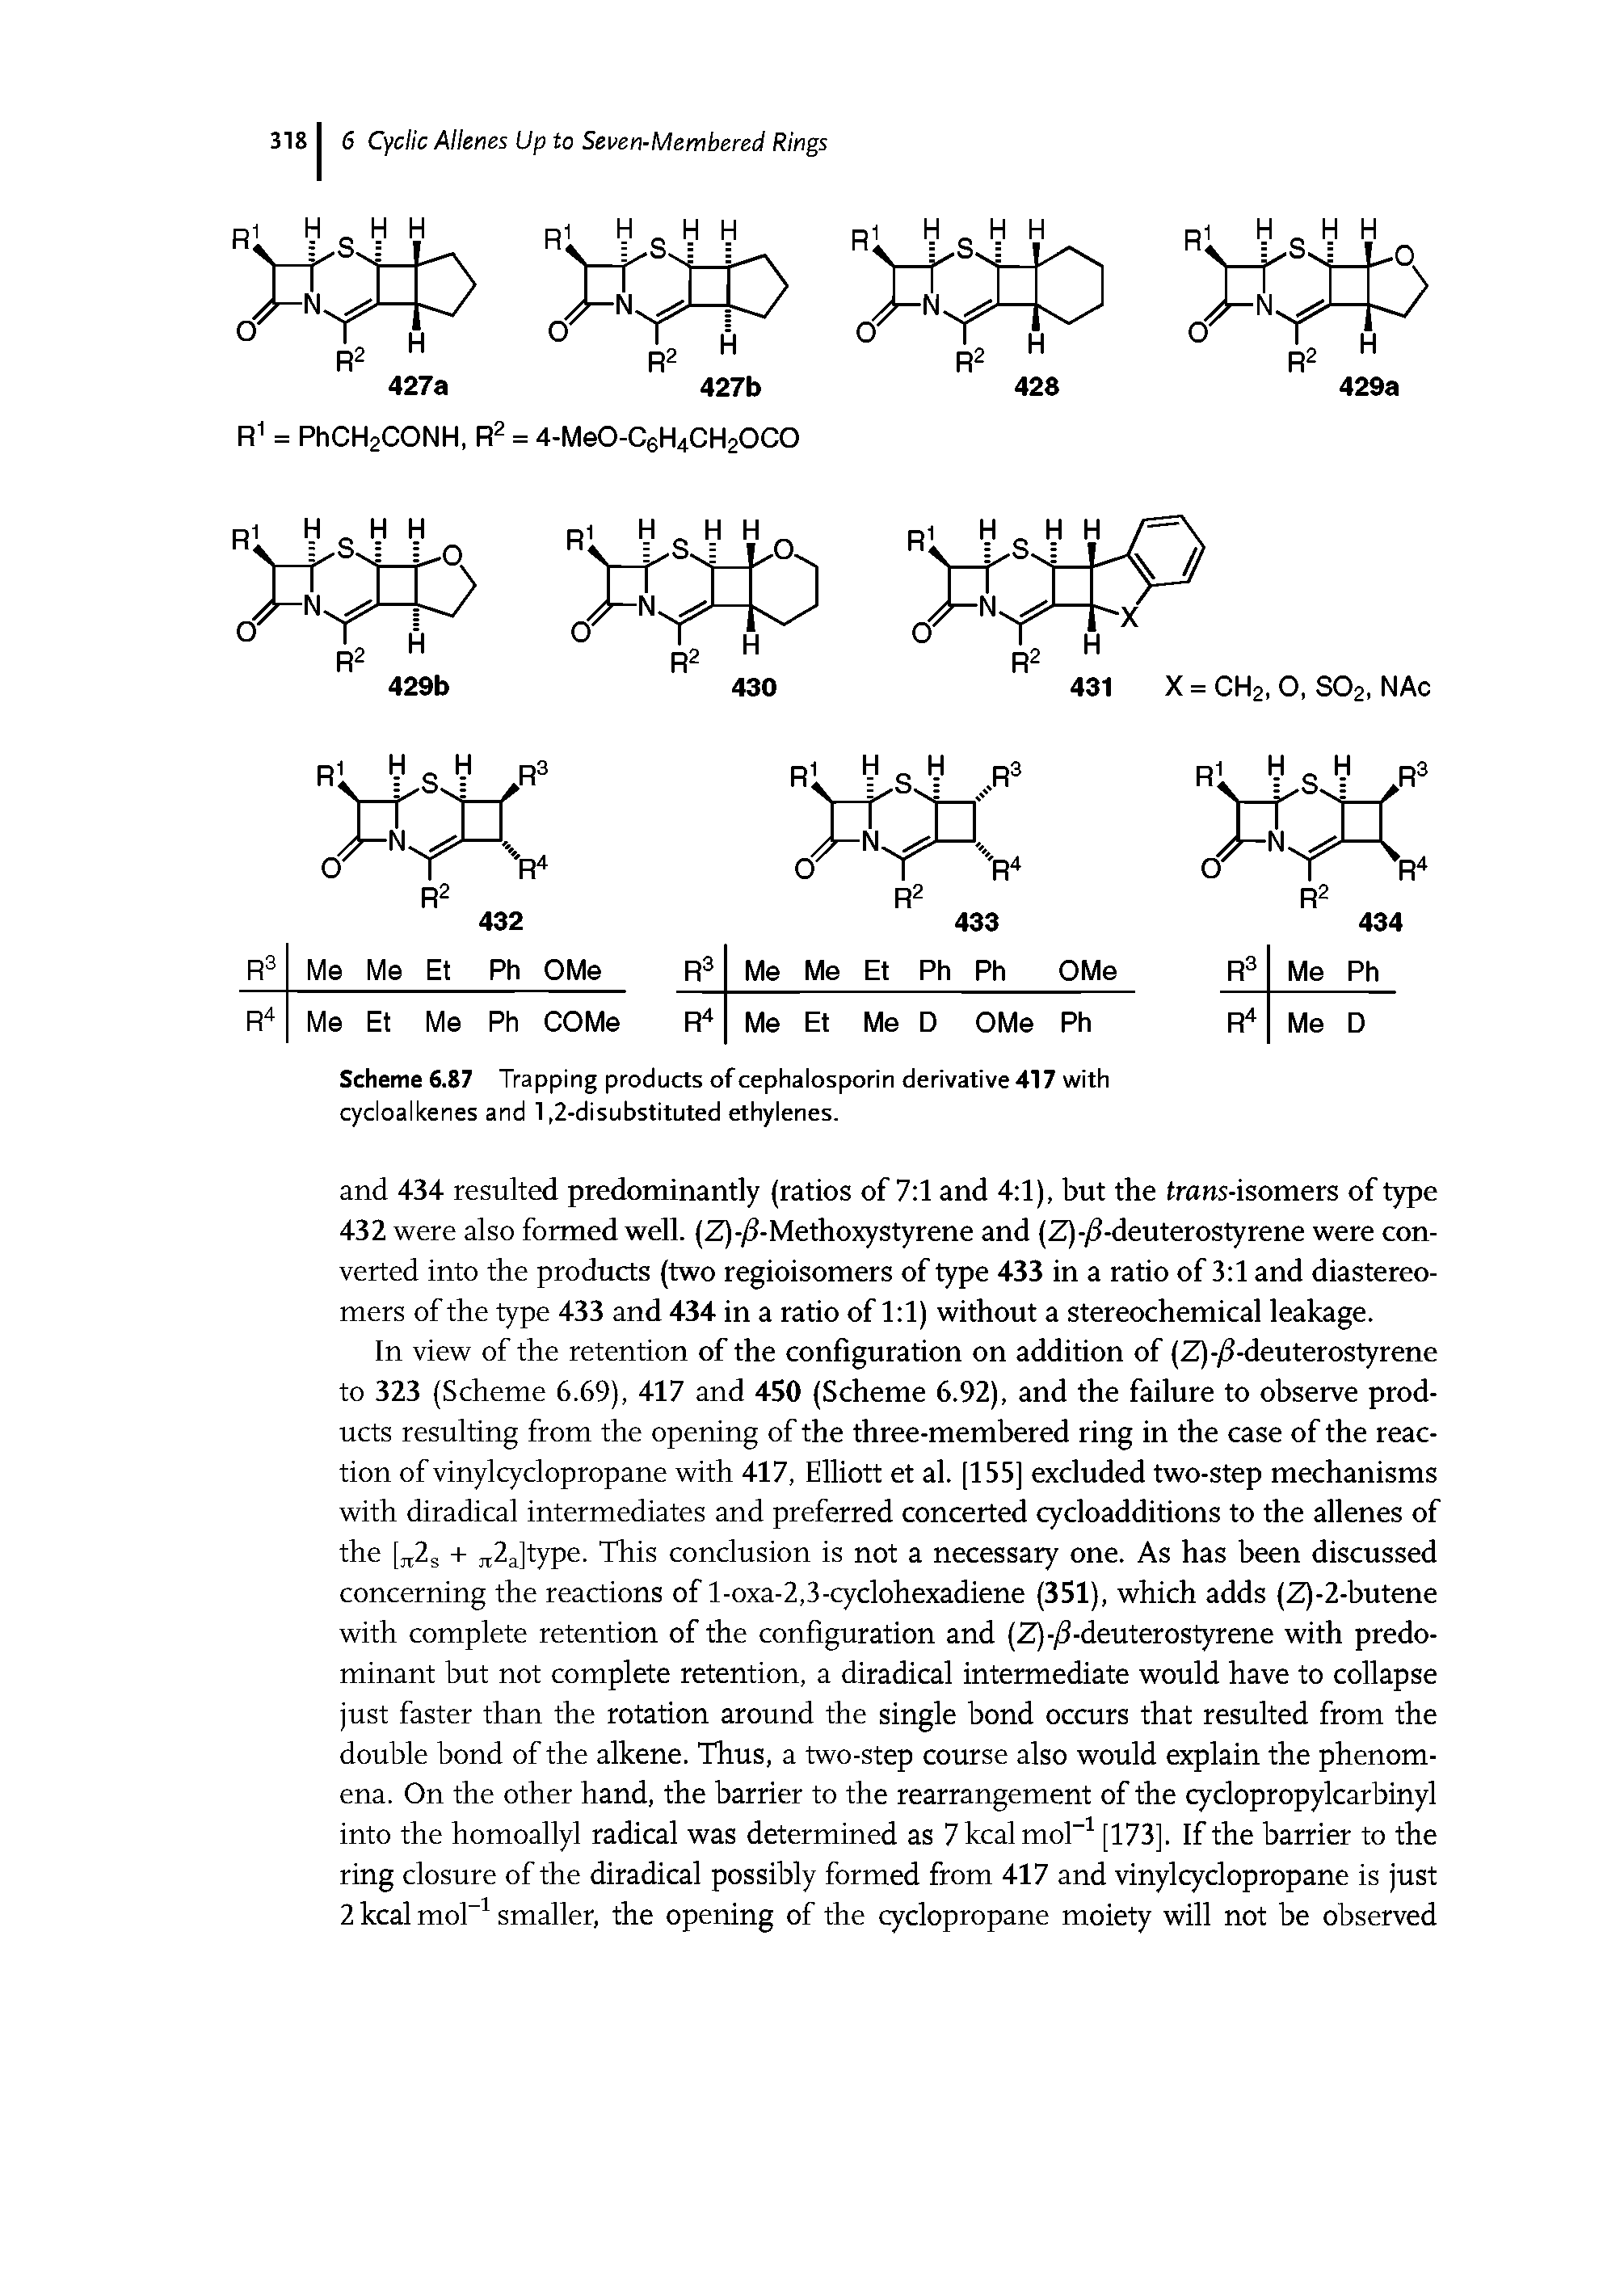 Scheme 6.87 Trapping products of cephalosporin derivative 417 with cycloalkenes and 1,2-disubstituted ethylenes.